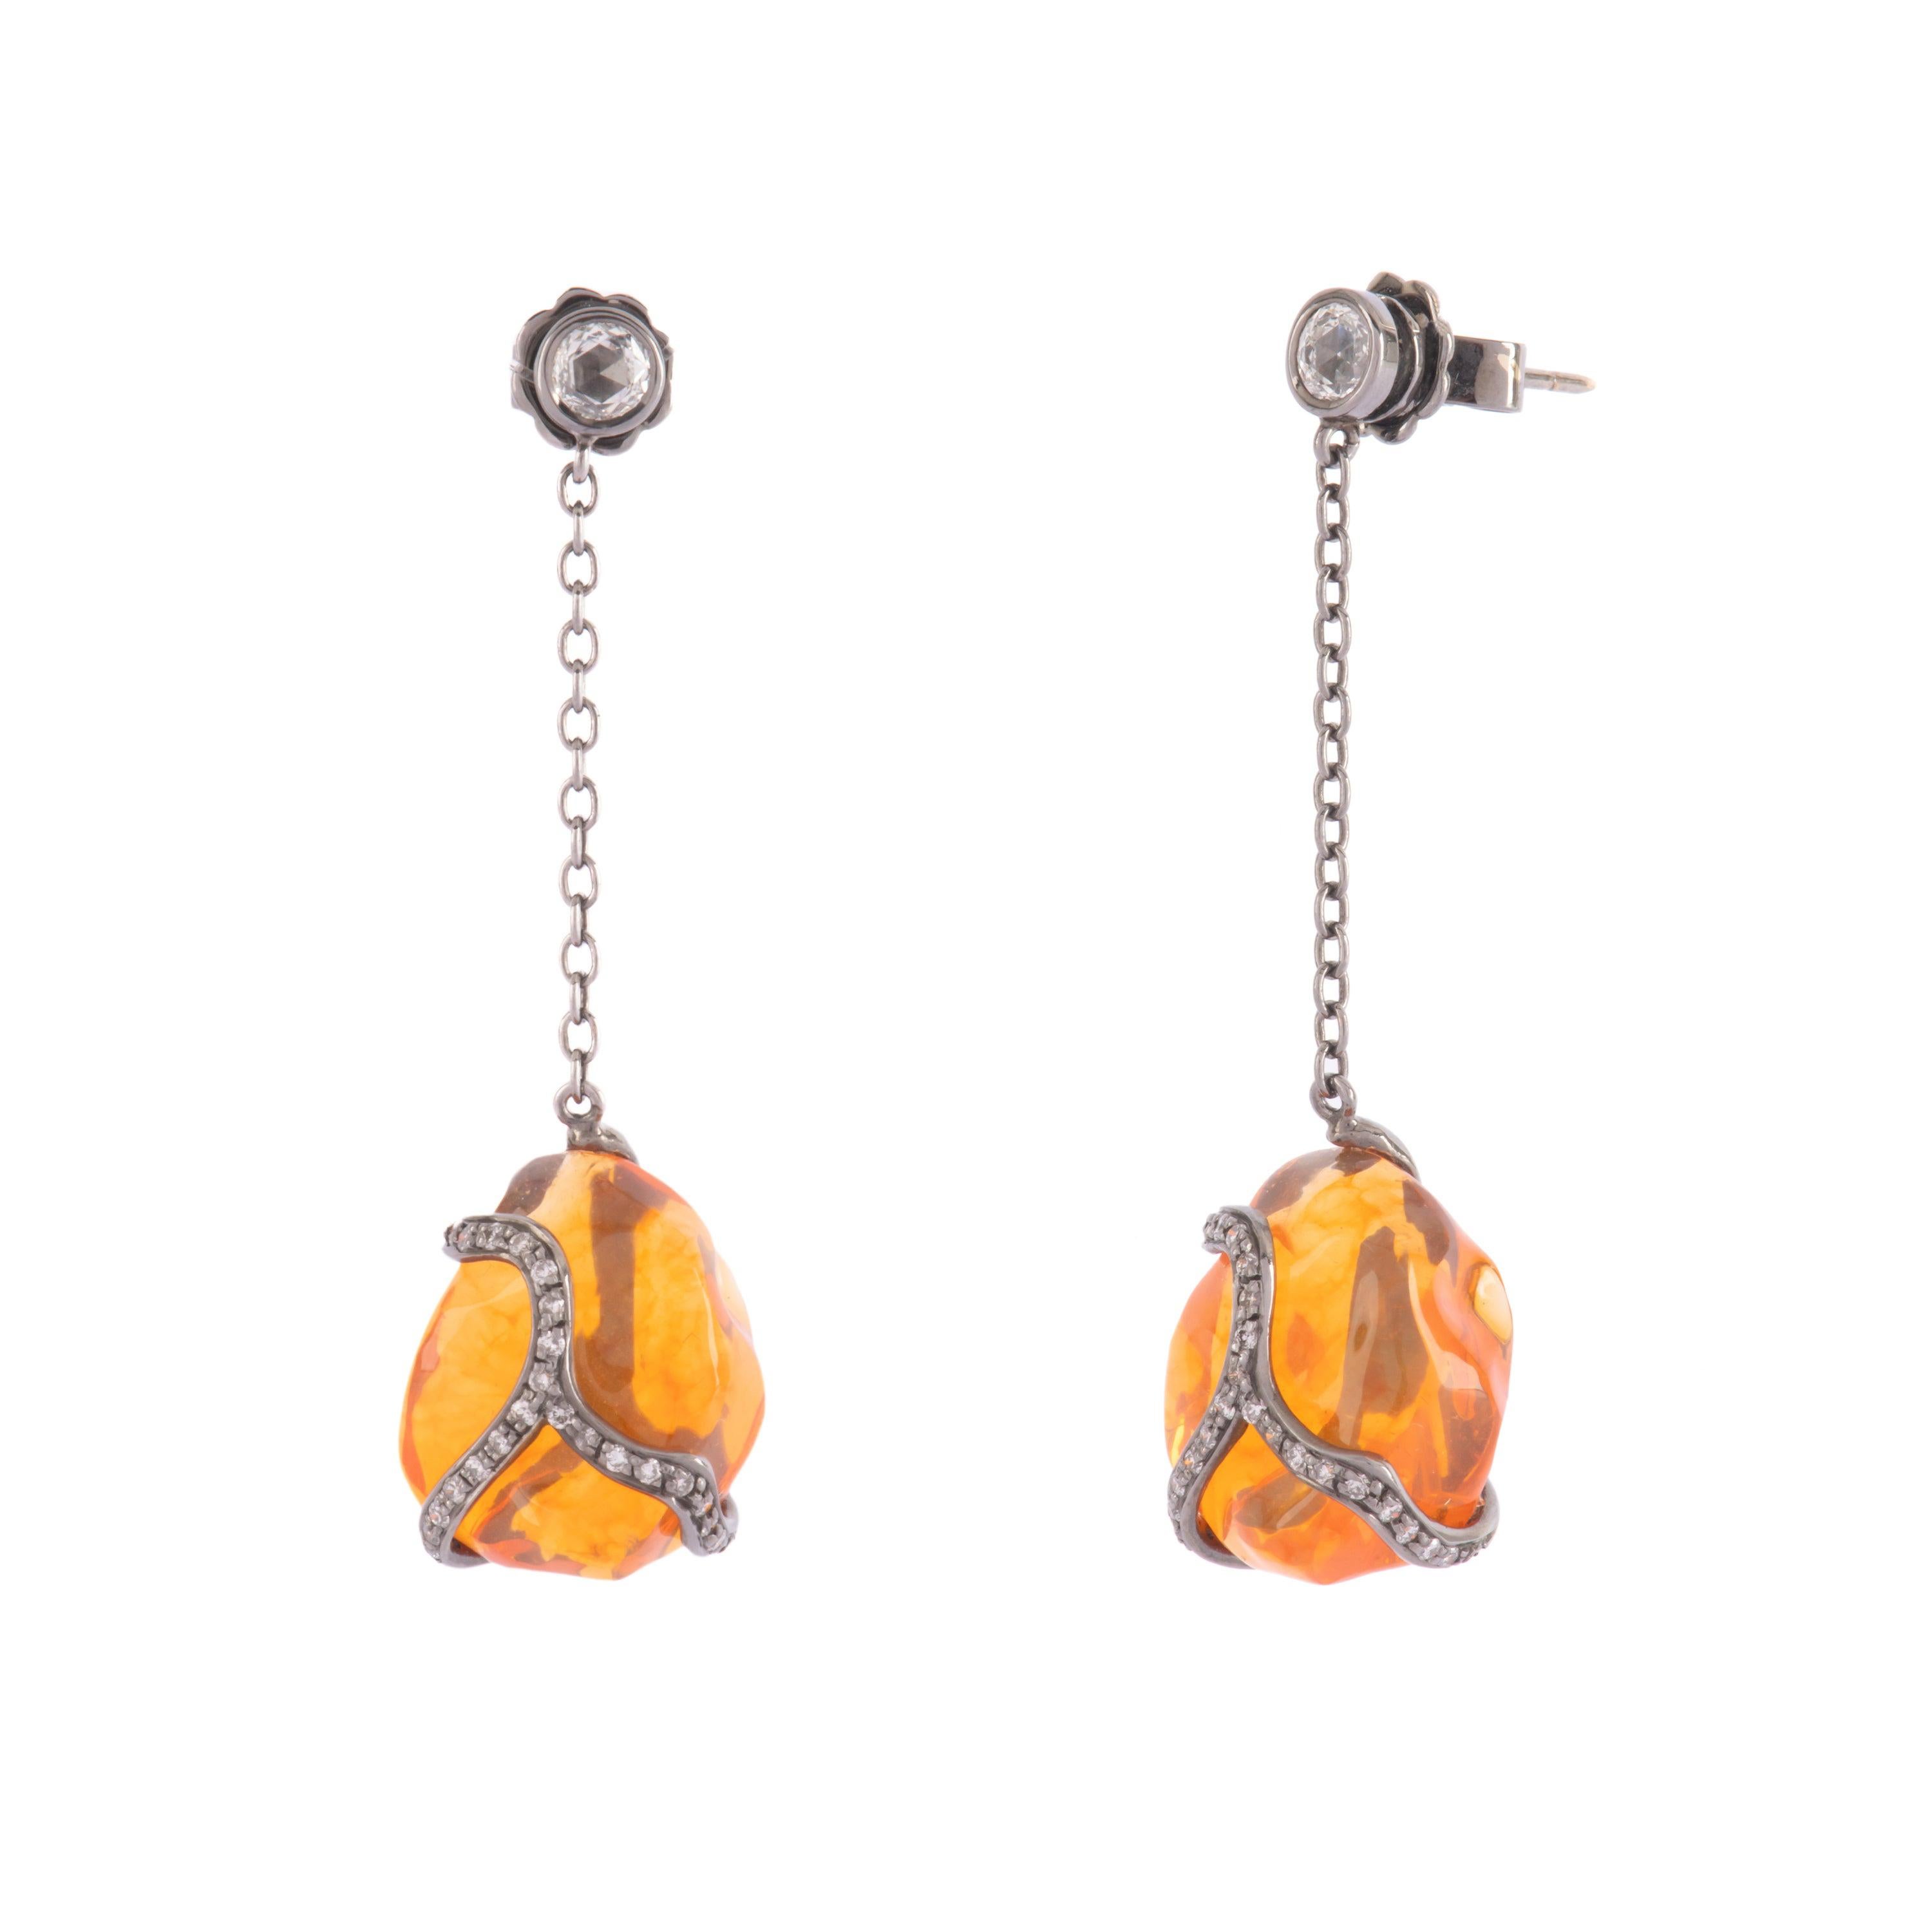 Black Gold Earrings Featured Two Big Fire Opal and Diamonds